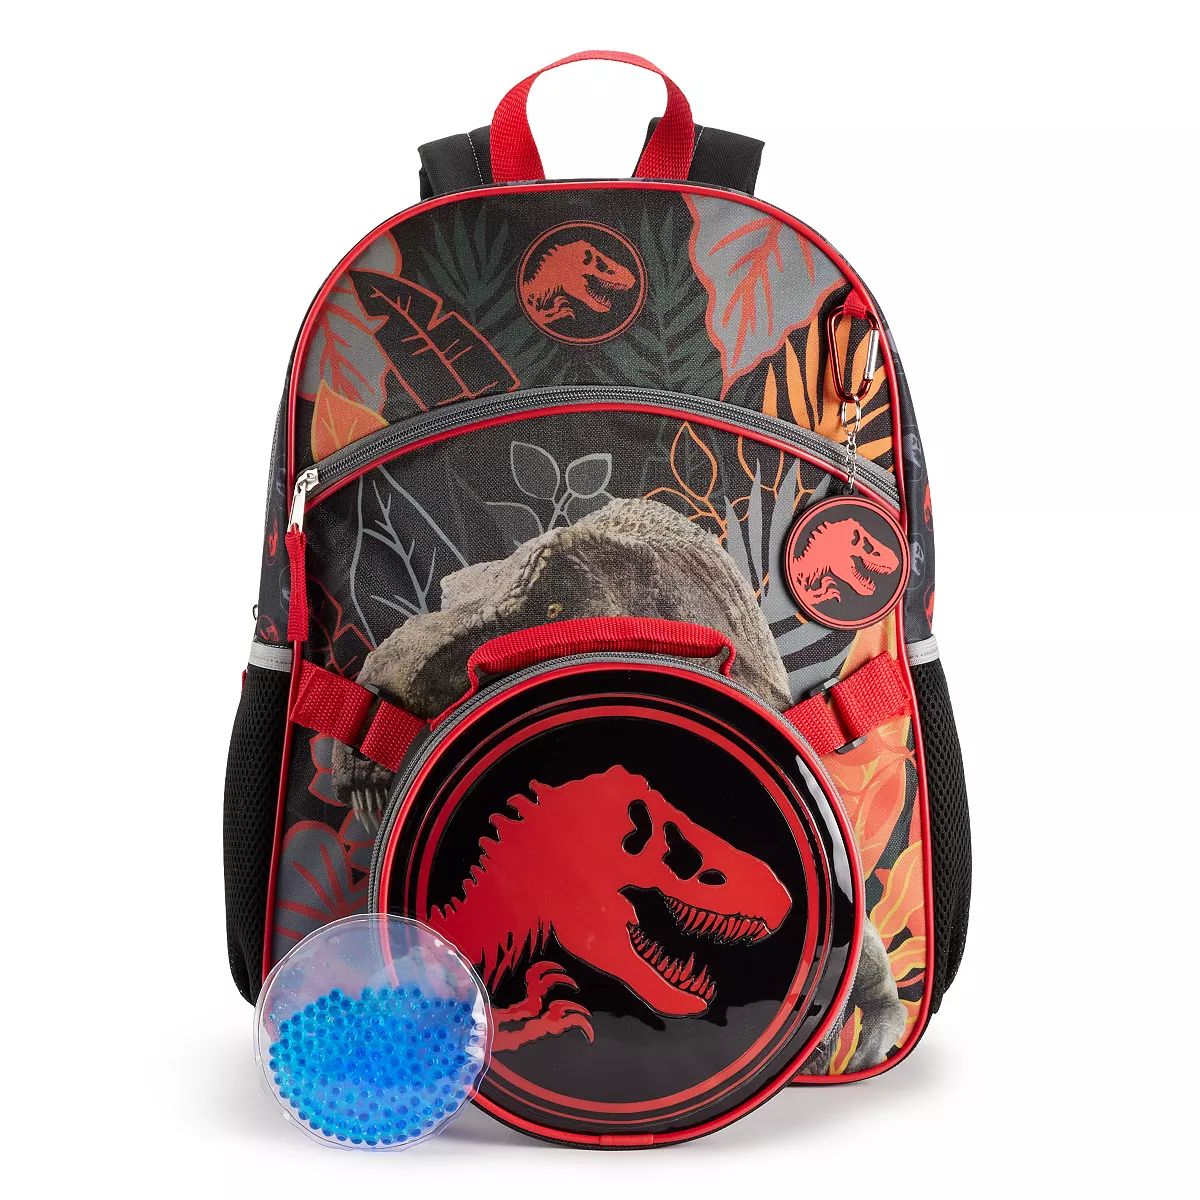 Boys Jurassic World Backpack with Lunch Bag | Kohl's